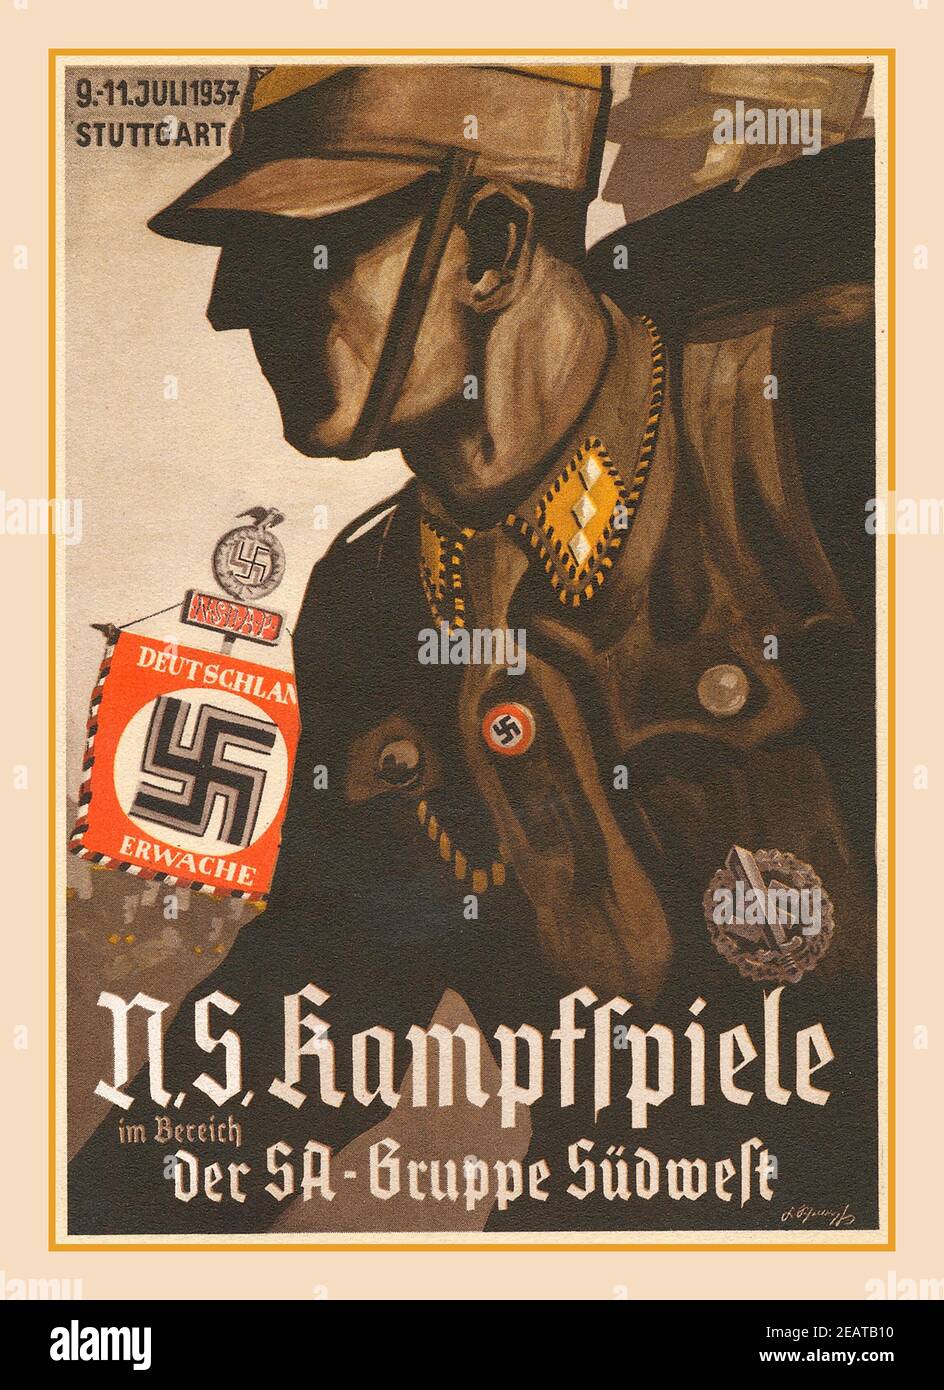 Vintage Nazi SA Propaganda: 1937,  'N.S. Fighting Games of the SA Group Southwest Stuttgart', NS-K The Sturmabteilung often shortened to SA was a paramilitary group for the German Nazi Party. Their leader was Ernst Röhm. The group was important in helping Adolf Hitler gain power in the 1930s. 1937, 'N.S. Kampfspiele der SA-Gruppe Südwest Stuttgart', illustration NS fighters and NS standard Deutschland Erwache ‘Germany Awake’ 1930’s Stock Photo